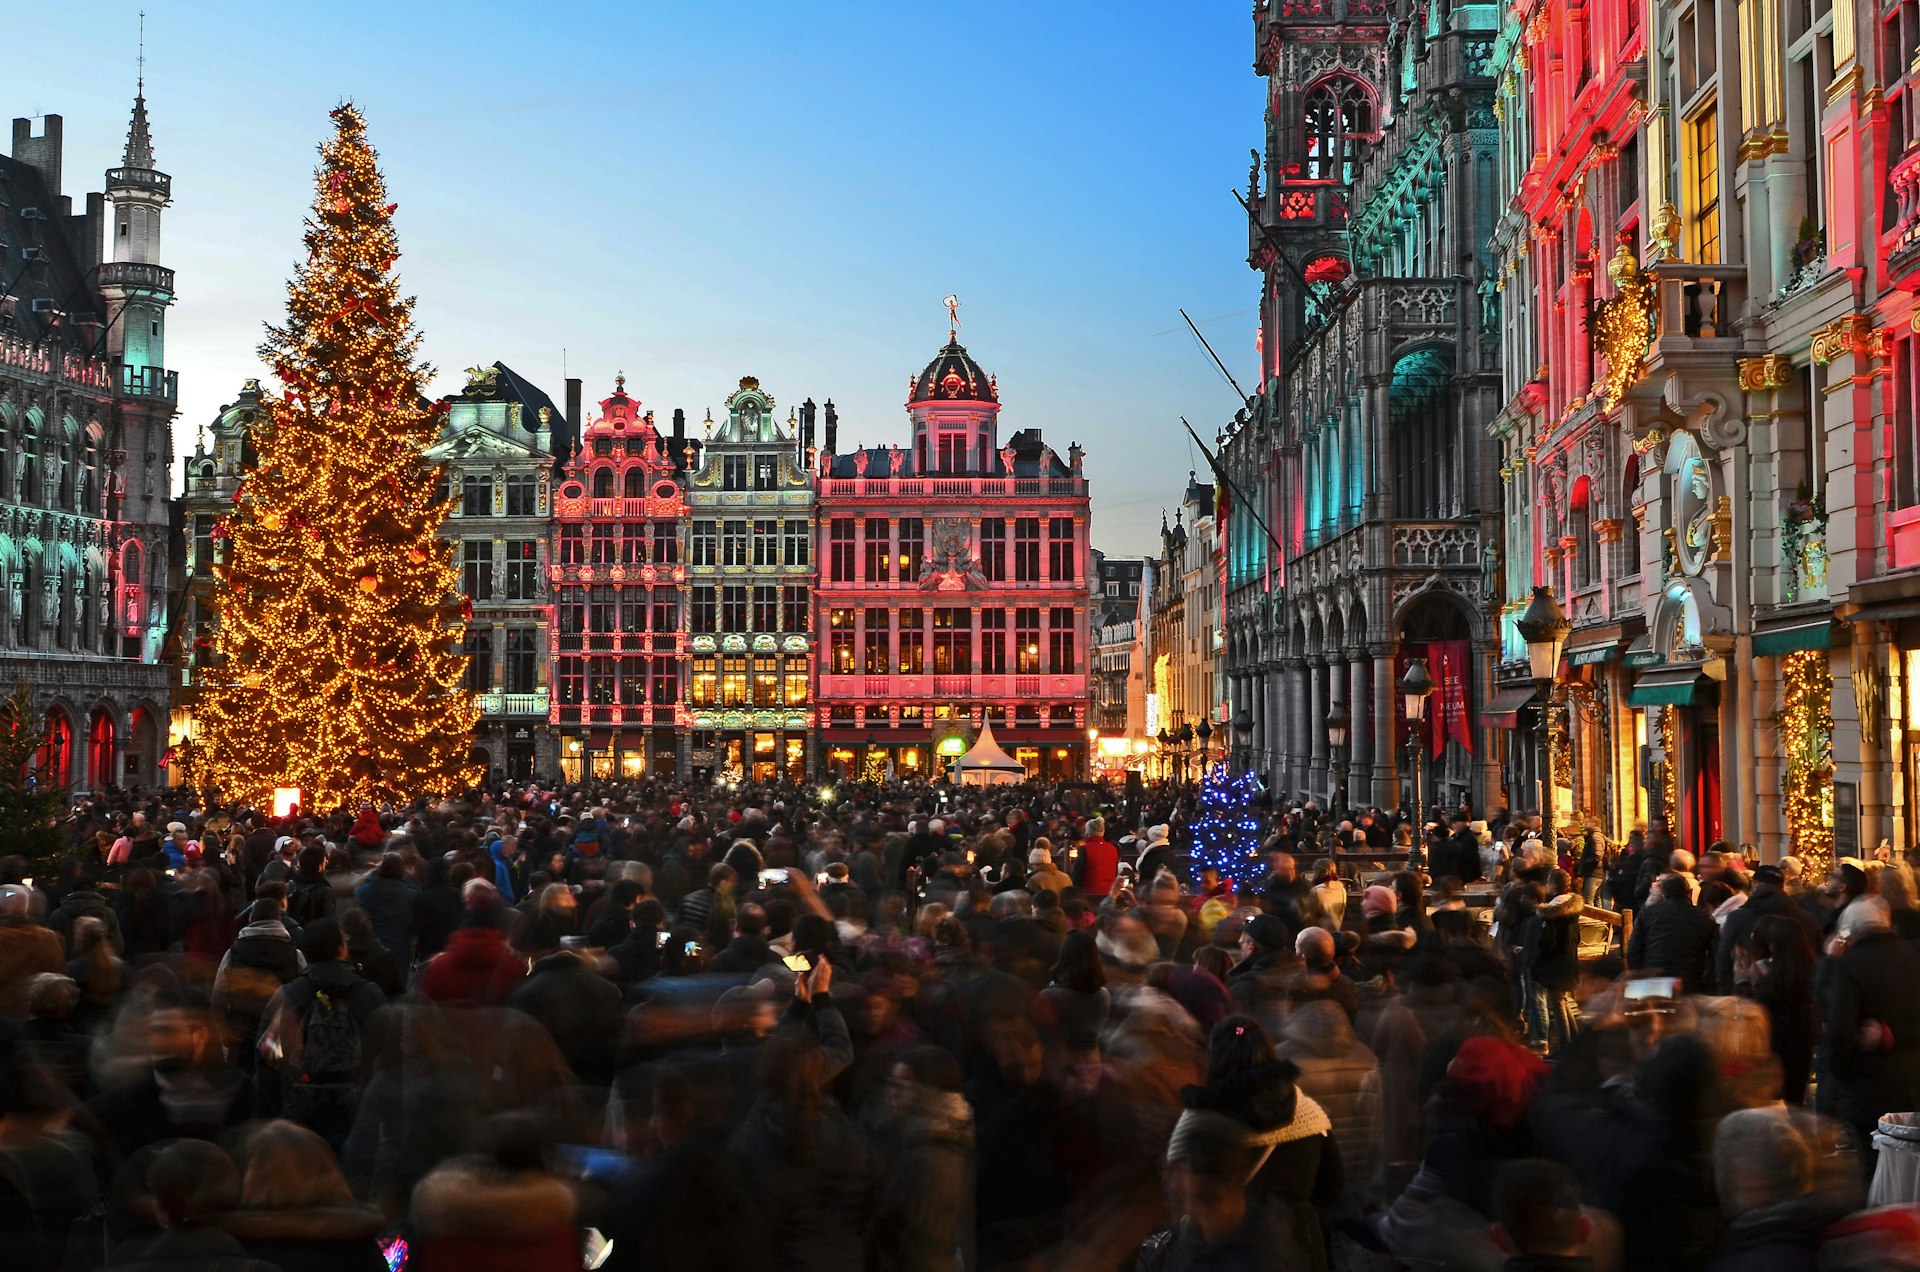 Crowd gathered at the iconic Grand Place in the centre of Brussels during Christmas evening at dusk. A large Christmas tree stands in the middle of the square.